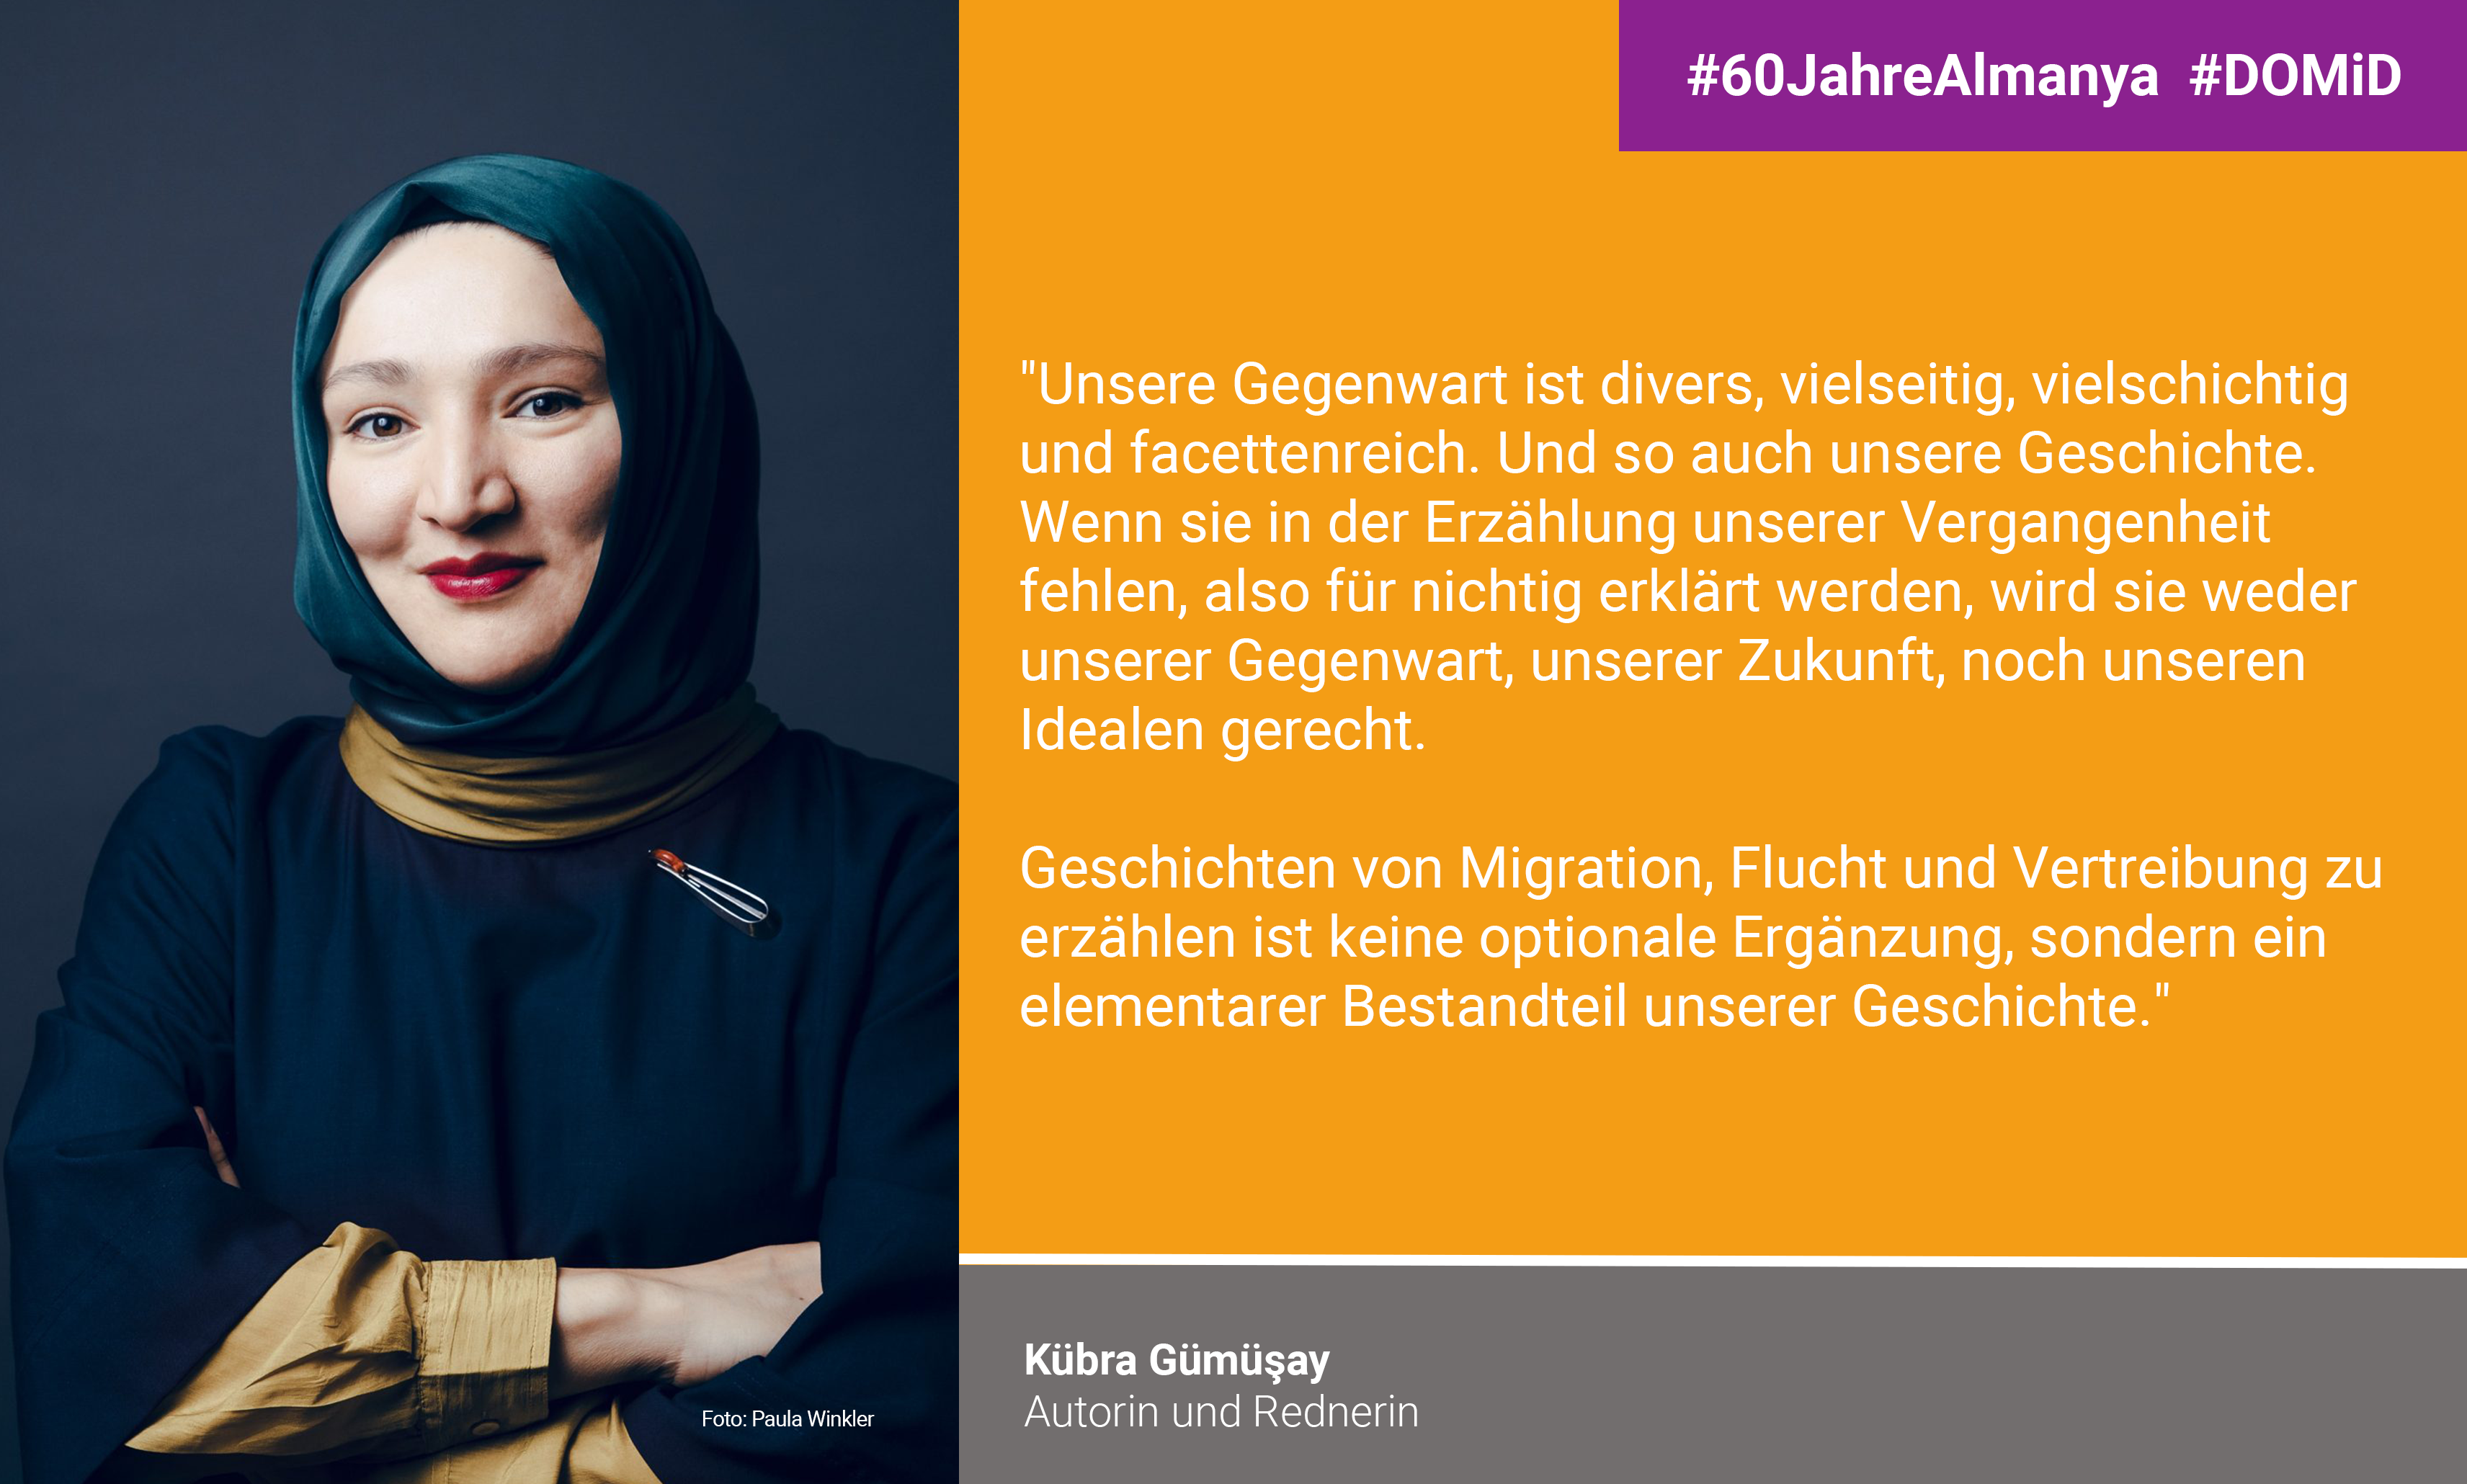 Kübra Gümüşay: "Our present is diverse, multifaceted, multi-layered  and multifaceted. And so is our history.  If it is missing from the narrative of our past, that is, if they are declared null and void, it will neither serve our present present, our future, nor our ideals.  justice.   Telling stories of migration, flight and displacement  is not an optional addition, but an elementary elementary part of our history."